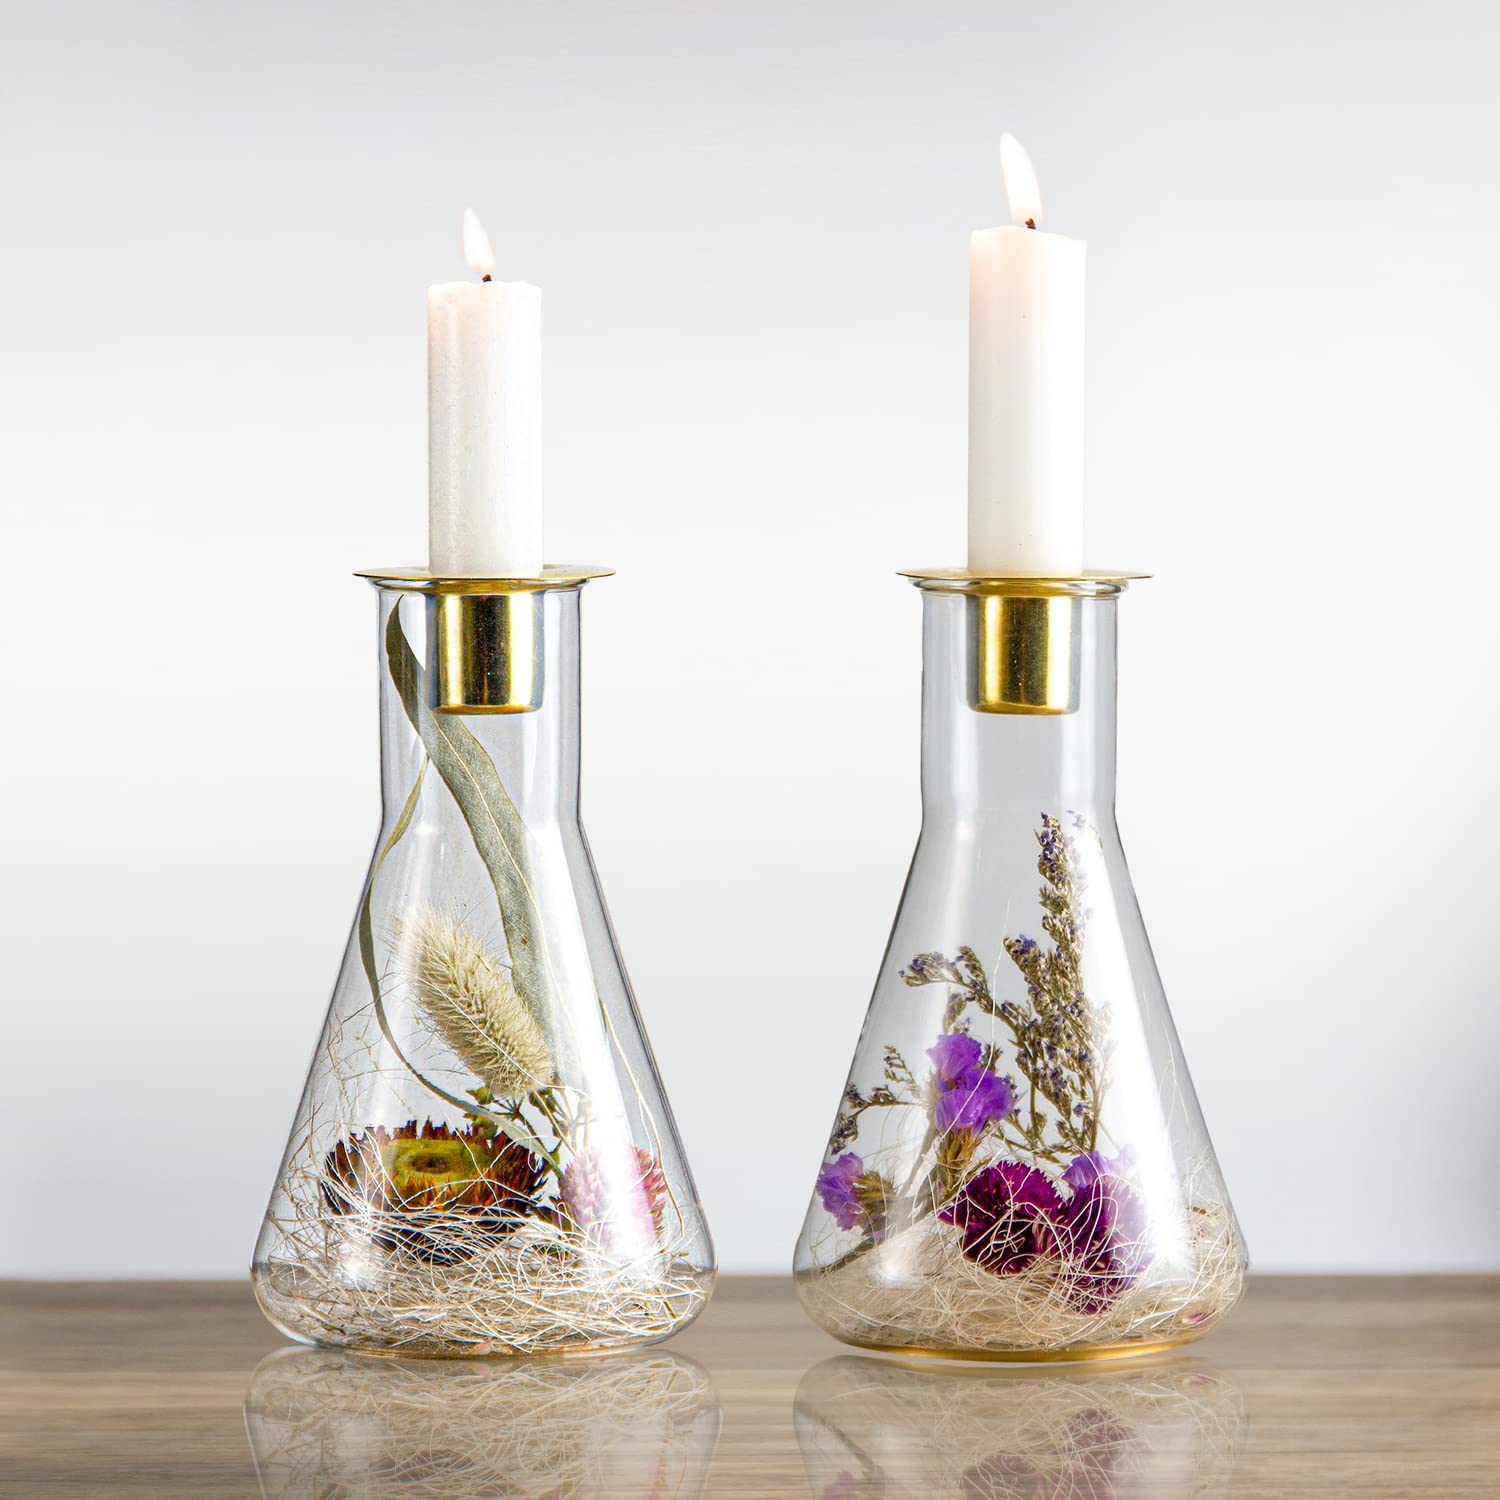 100% Original Whiskey Stones Round - Taper Candle Holder,Glass Candlestick Holders with Dried Flower Bottle,Vintage Candle Stick Holder Set of 2 for Home Decor – Shunstone